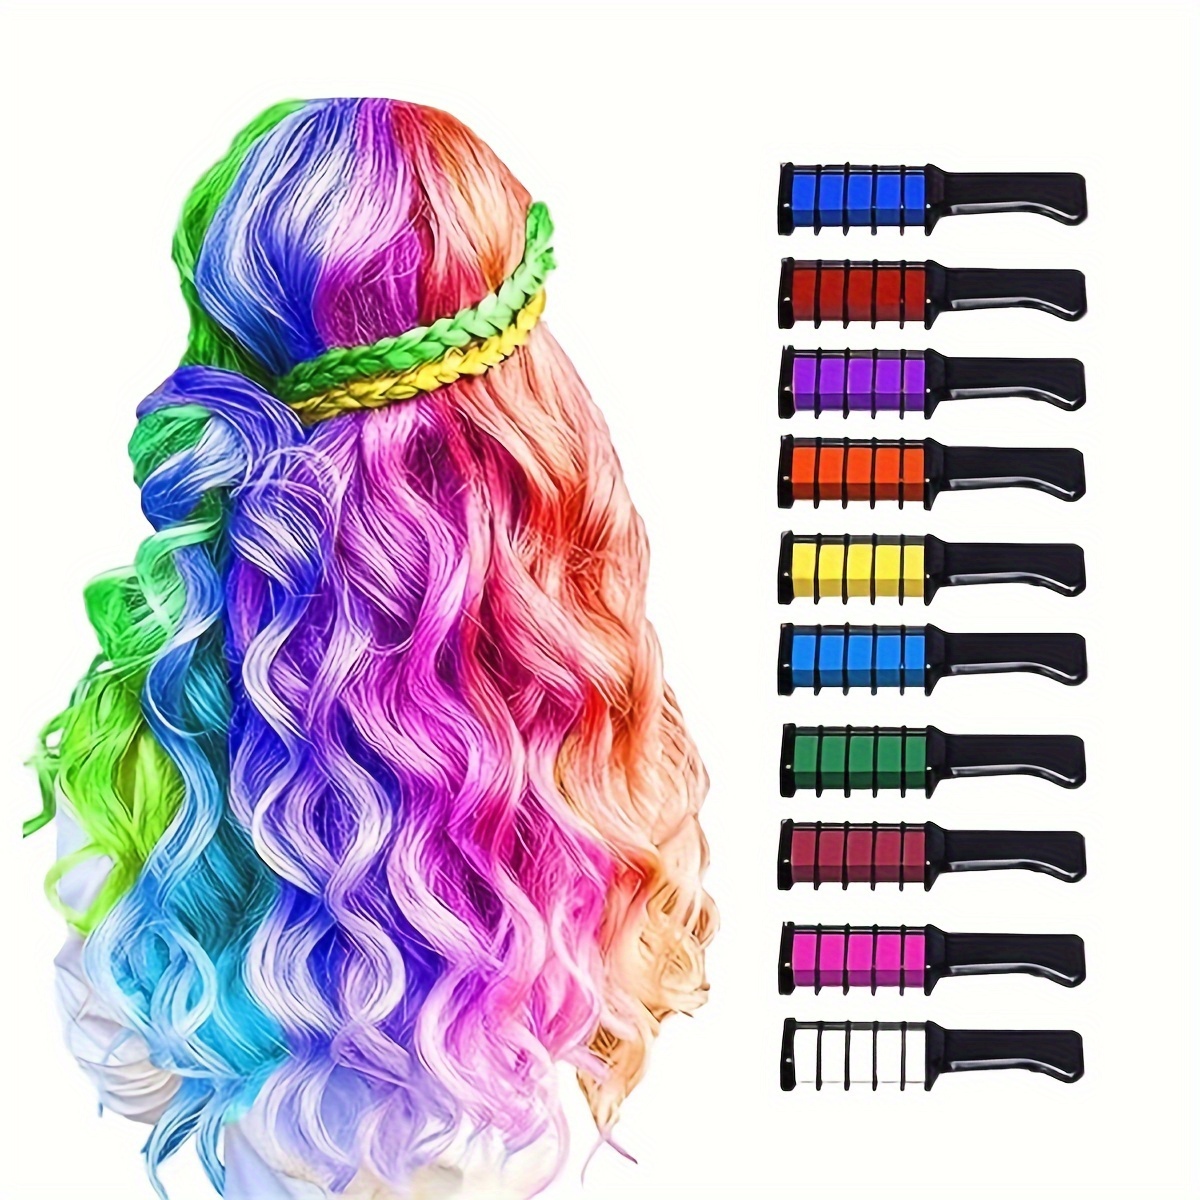 Dog Color Paste and Hair Chalk Value Pack - Temporary Dog Hair